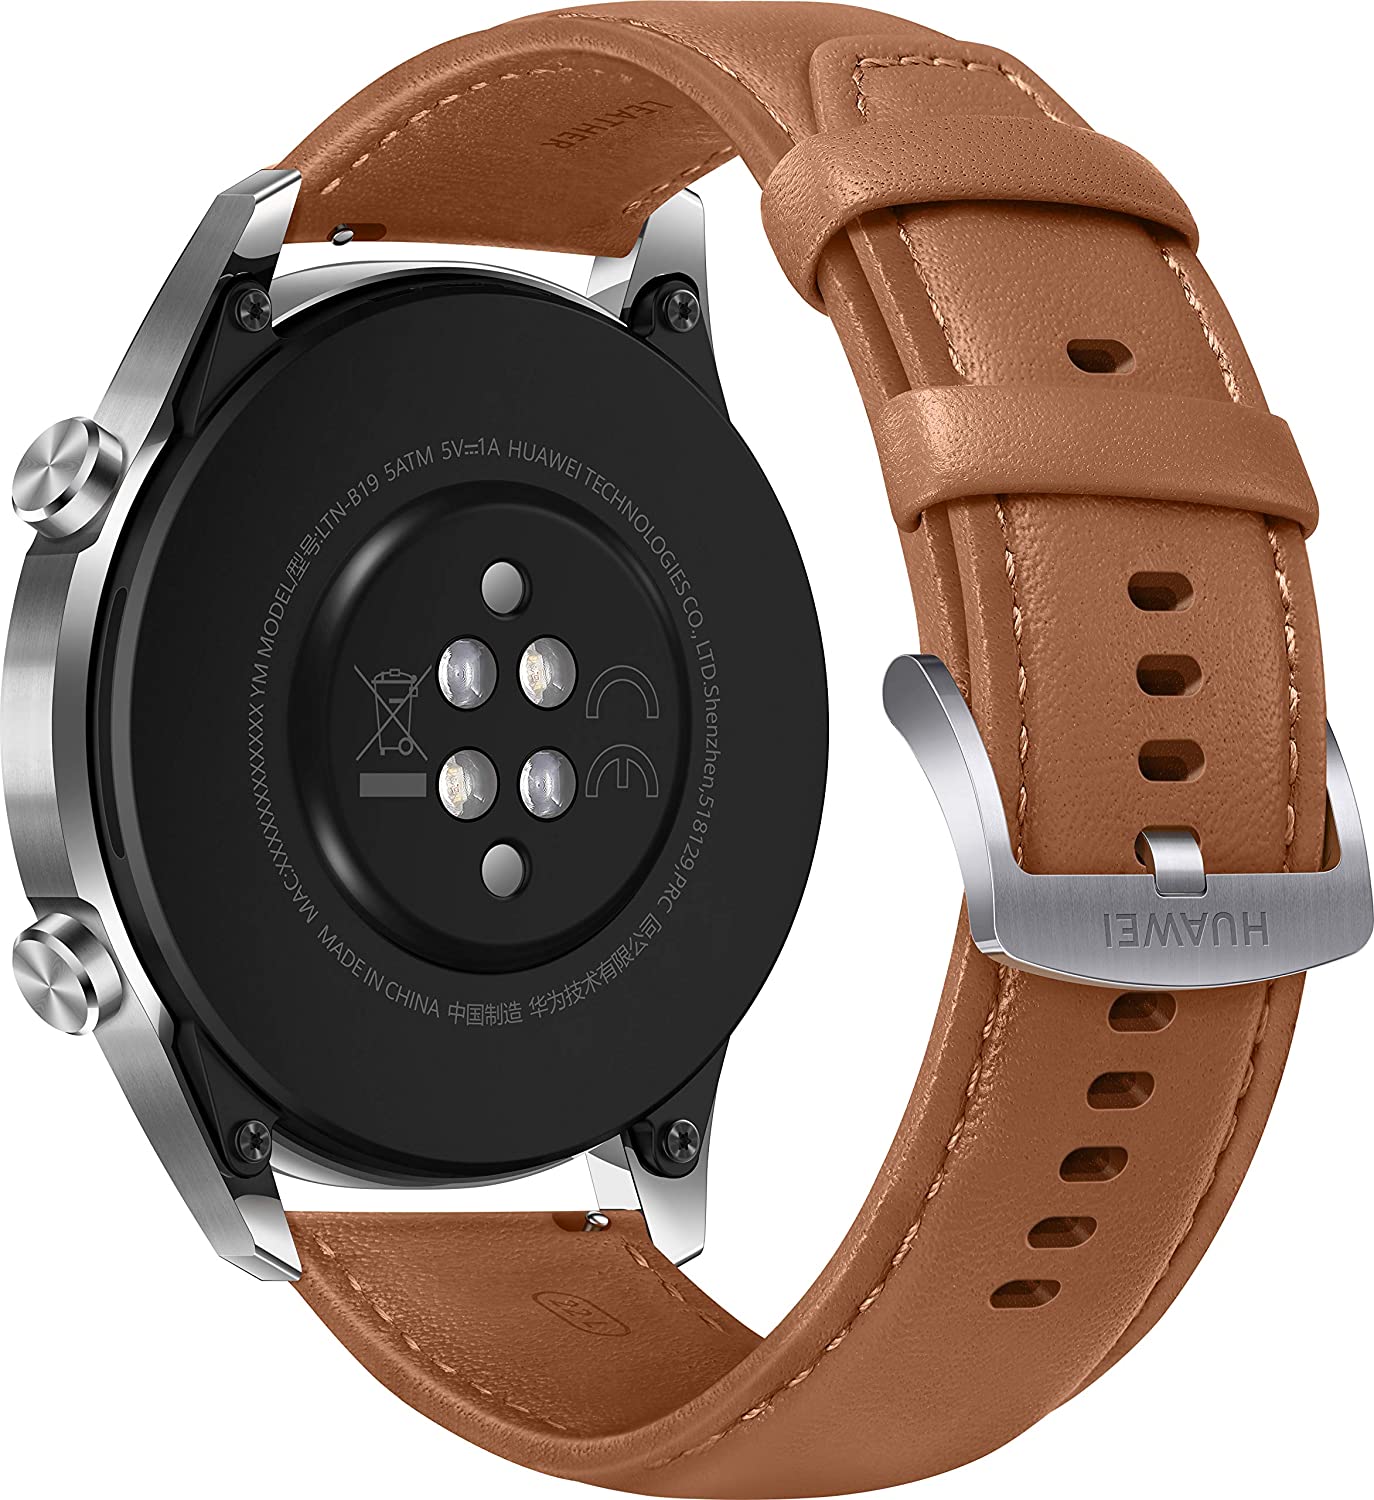 huawei watch gt 2 - with heart rate measurement, music